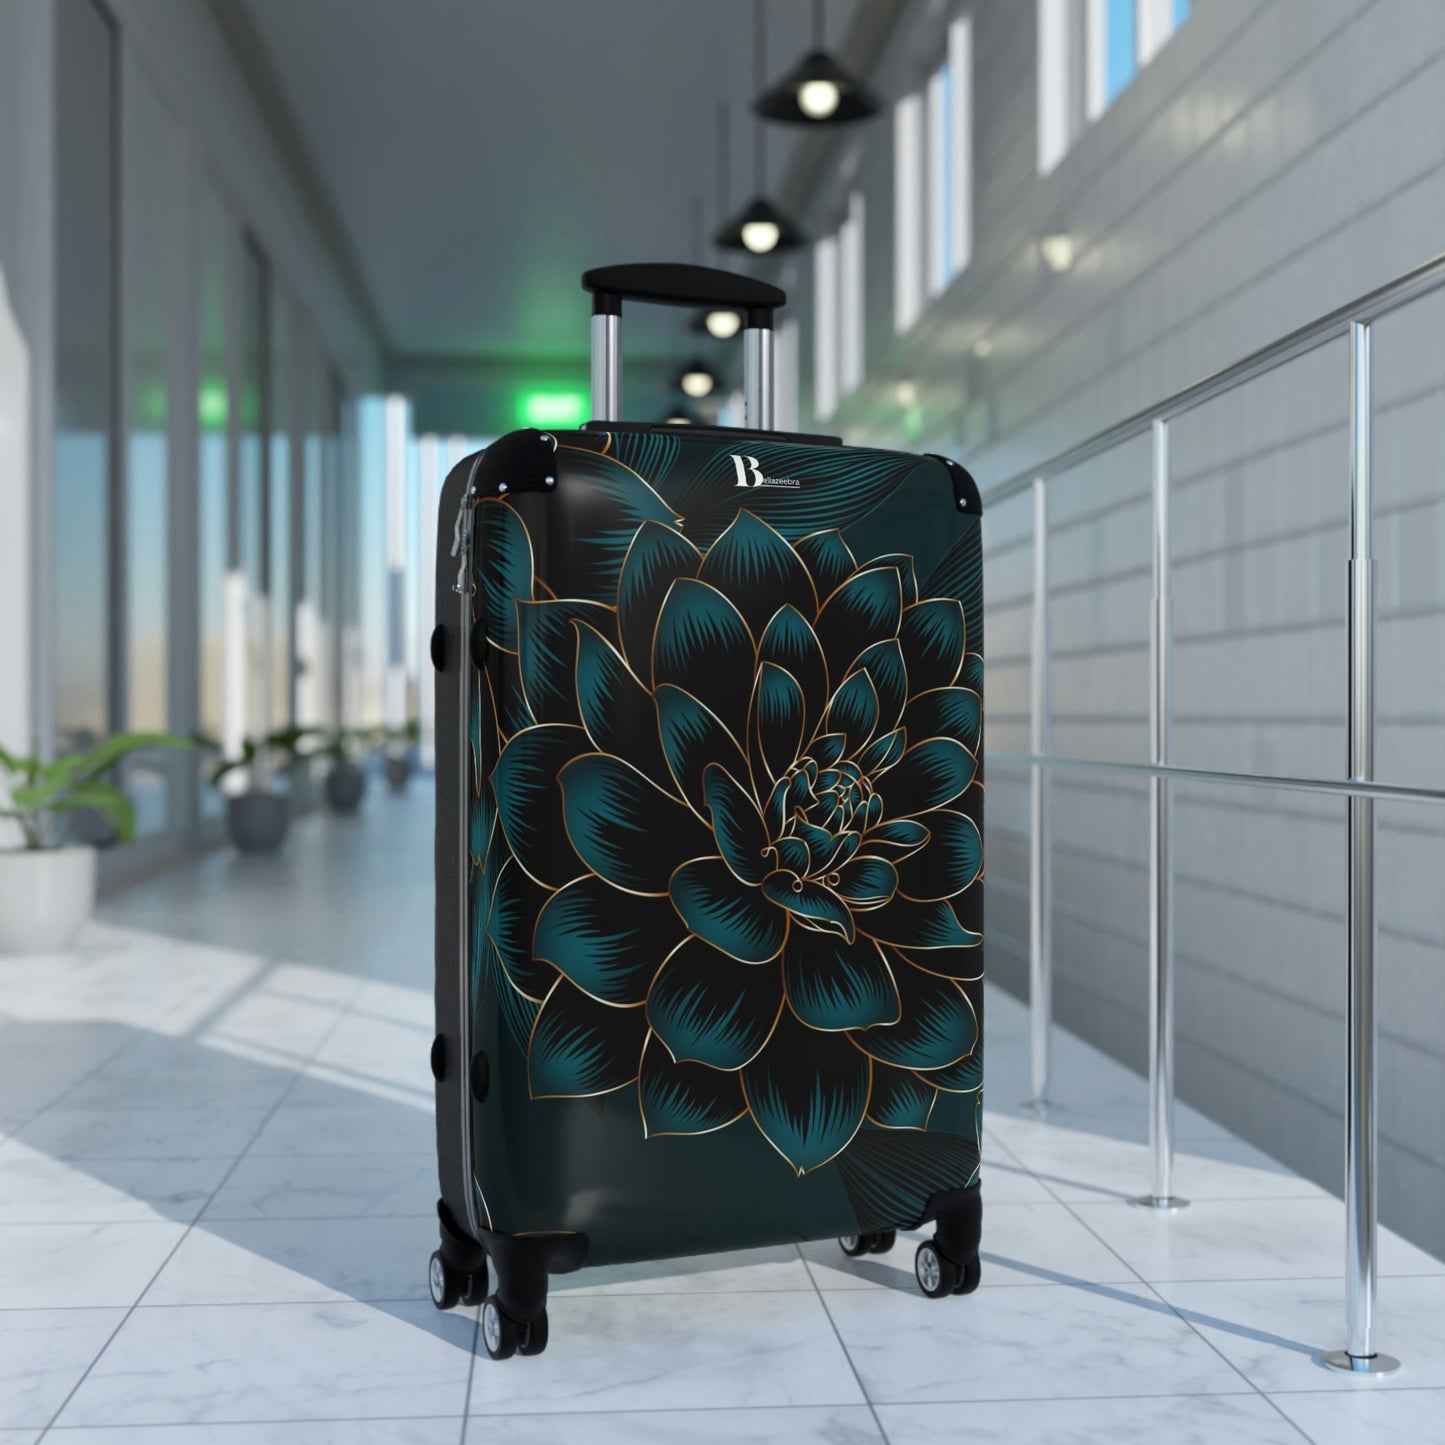 BELLAZEEBRA Customized suitcases with flower print in dark blue and black